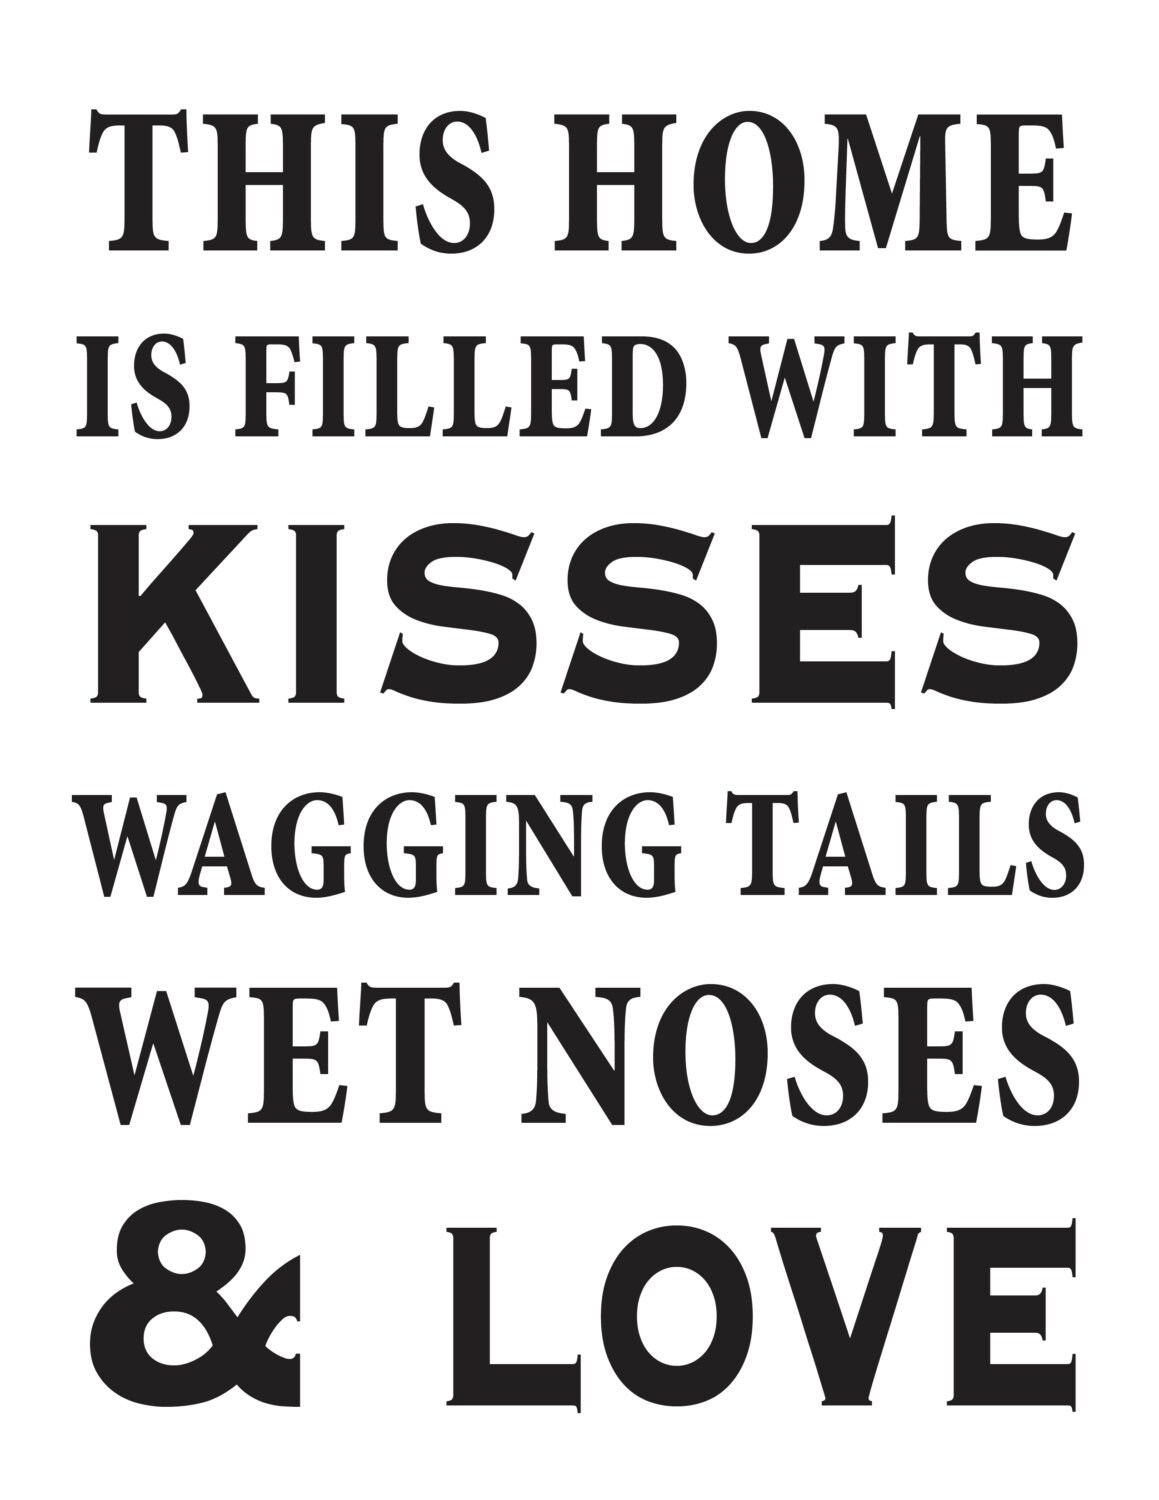 This Home Is Filled With Kisses Wagging Tails By Shinebeautifully